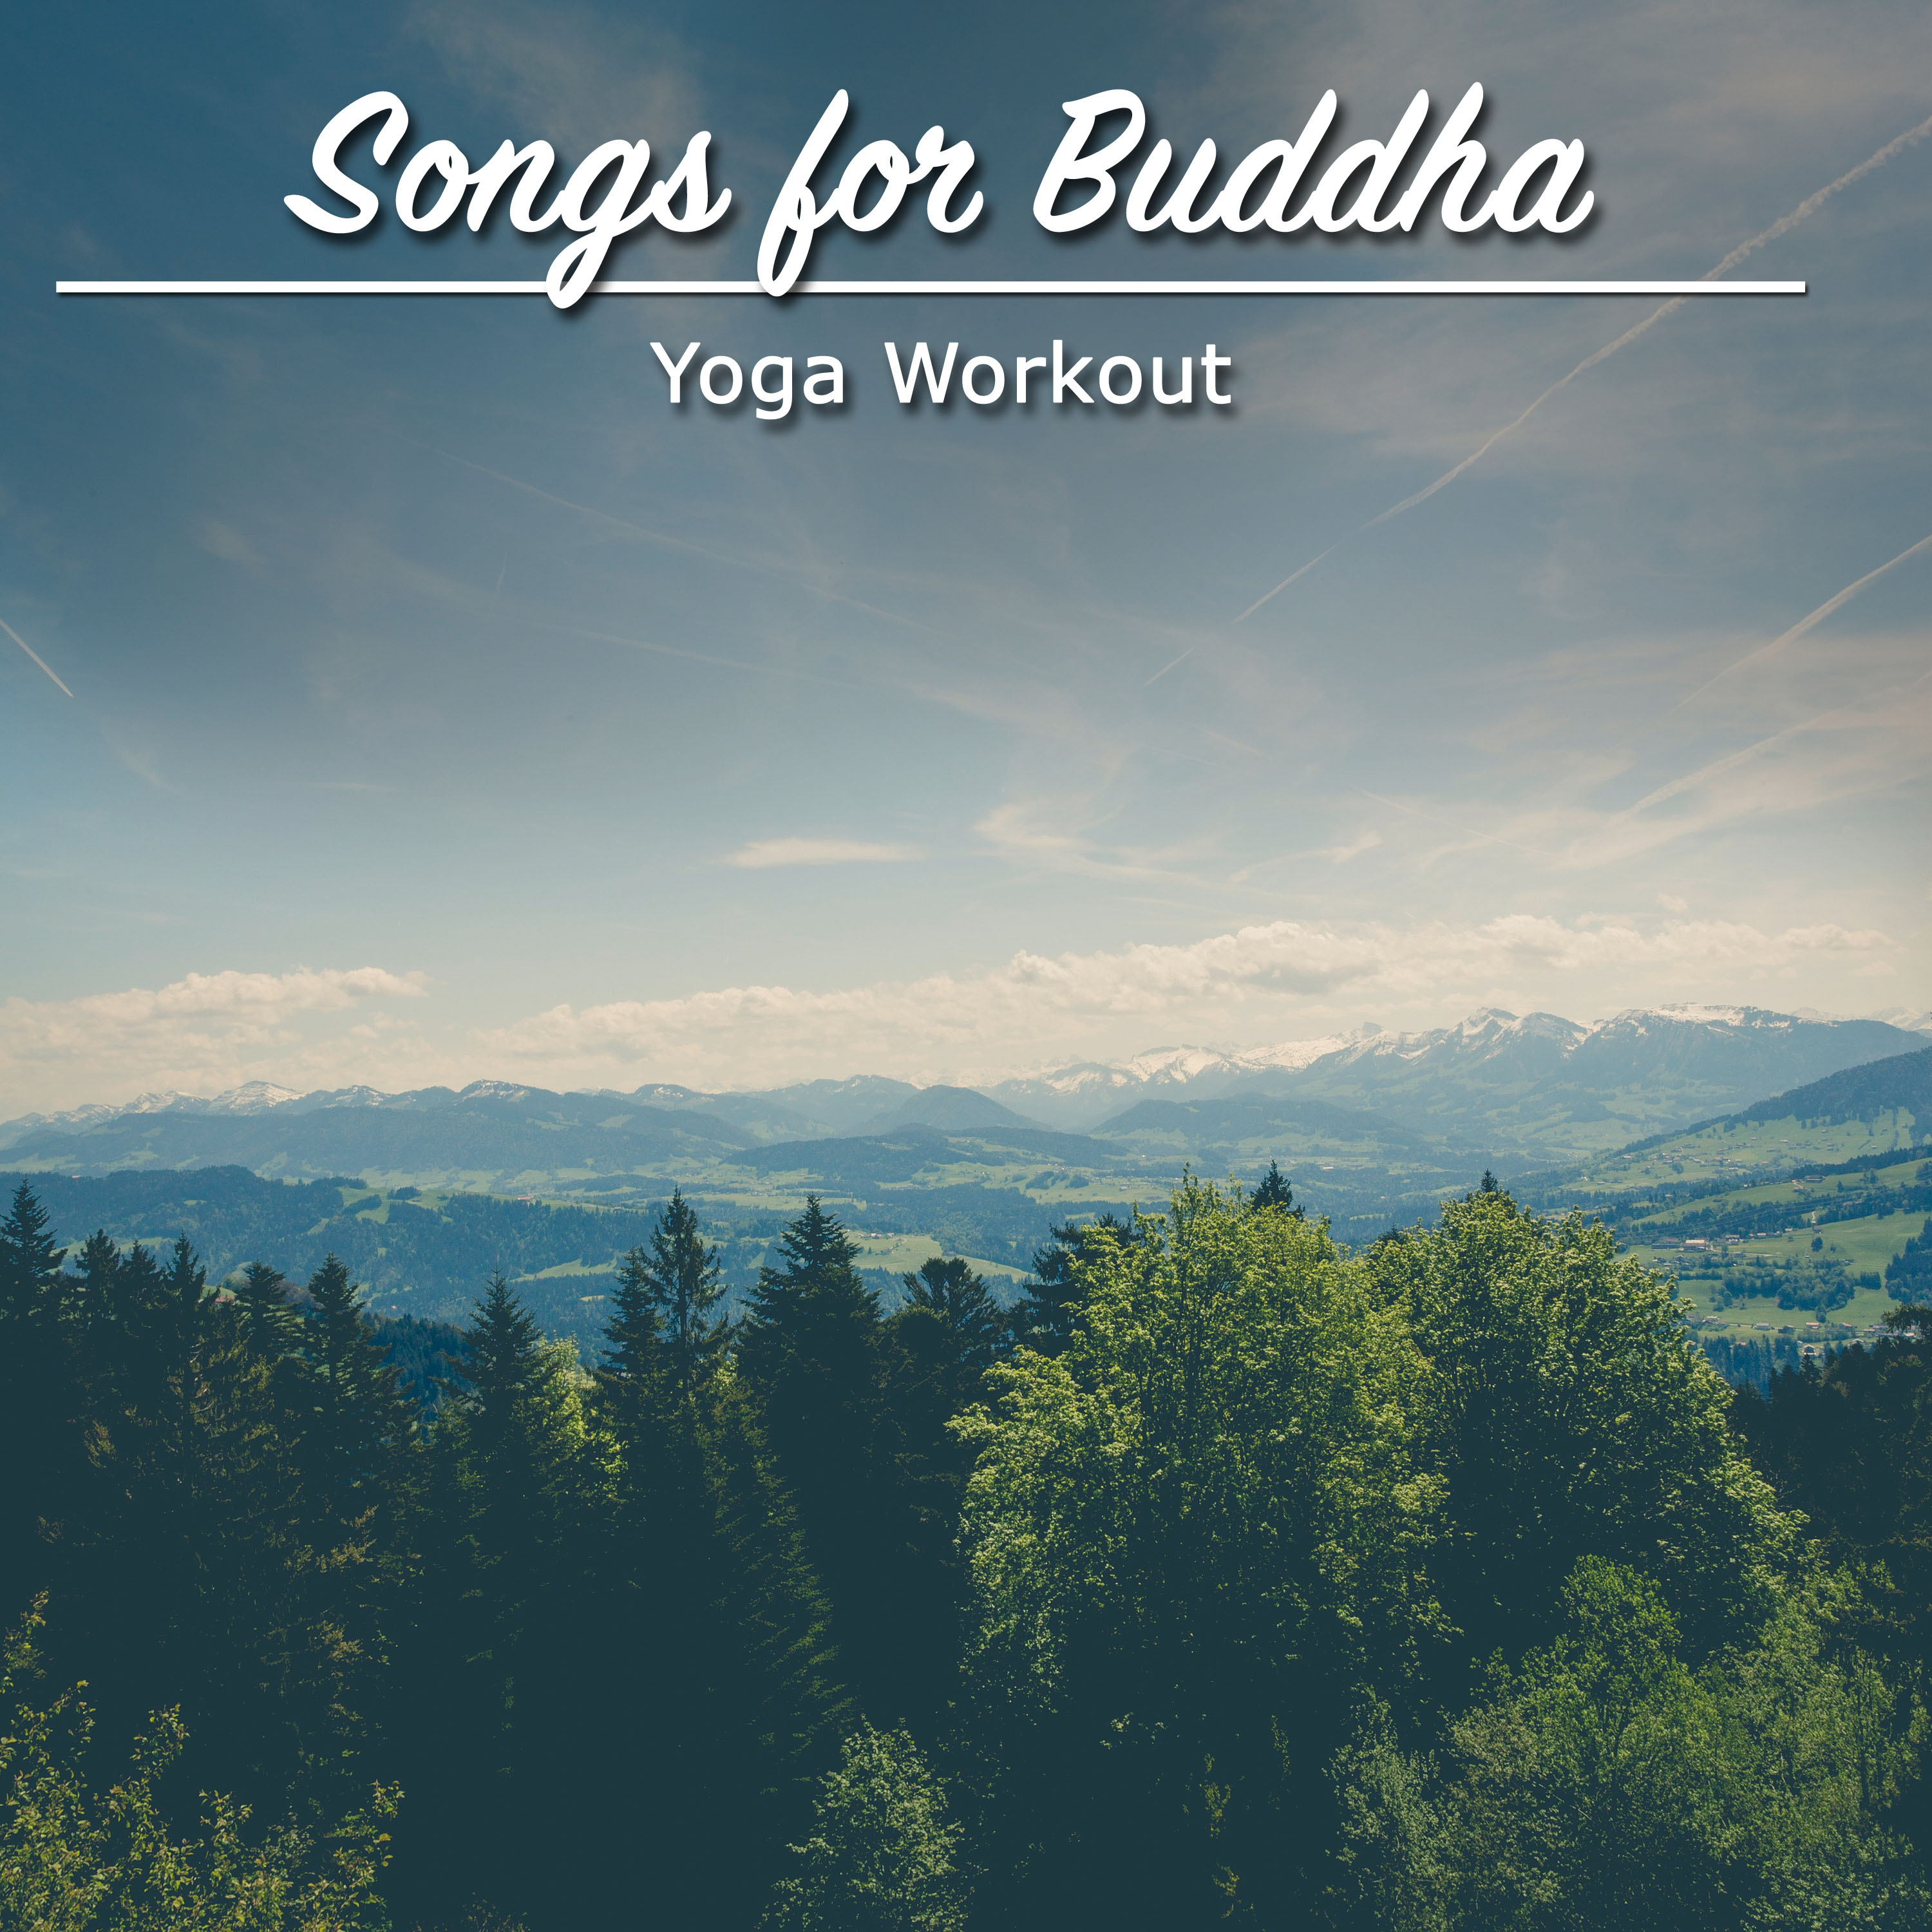 12 Songs for Buddha - A Yoga Workout Collection